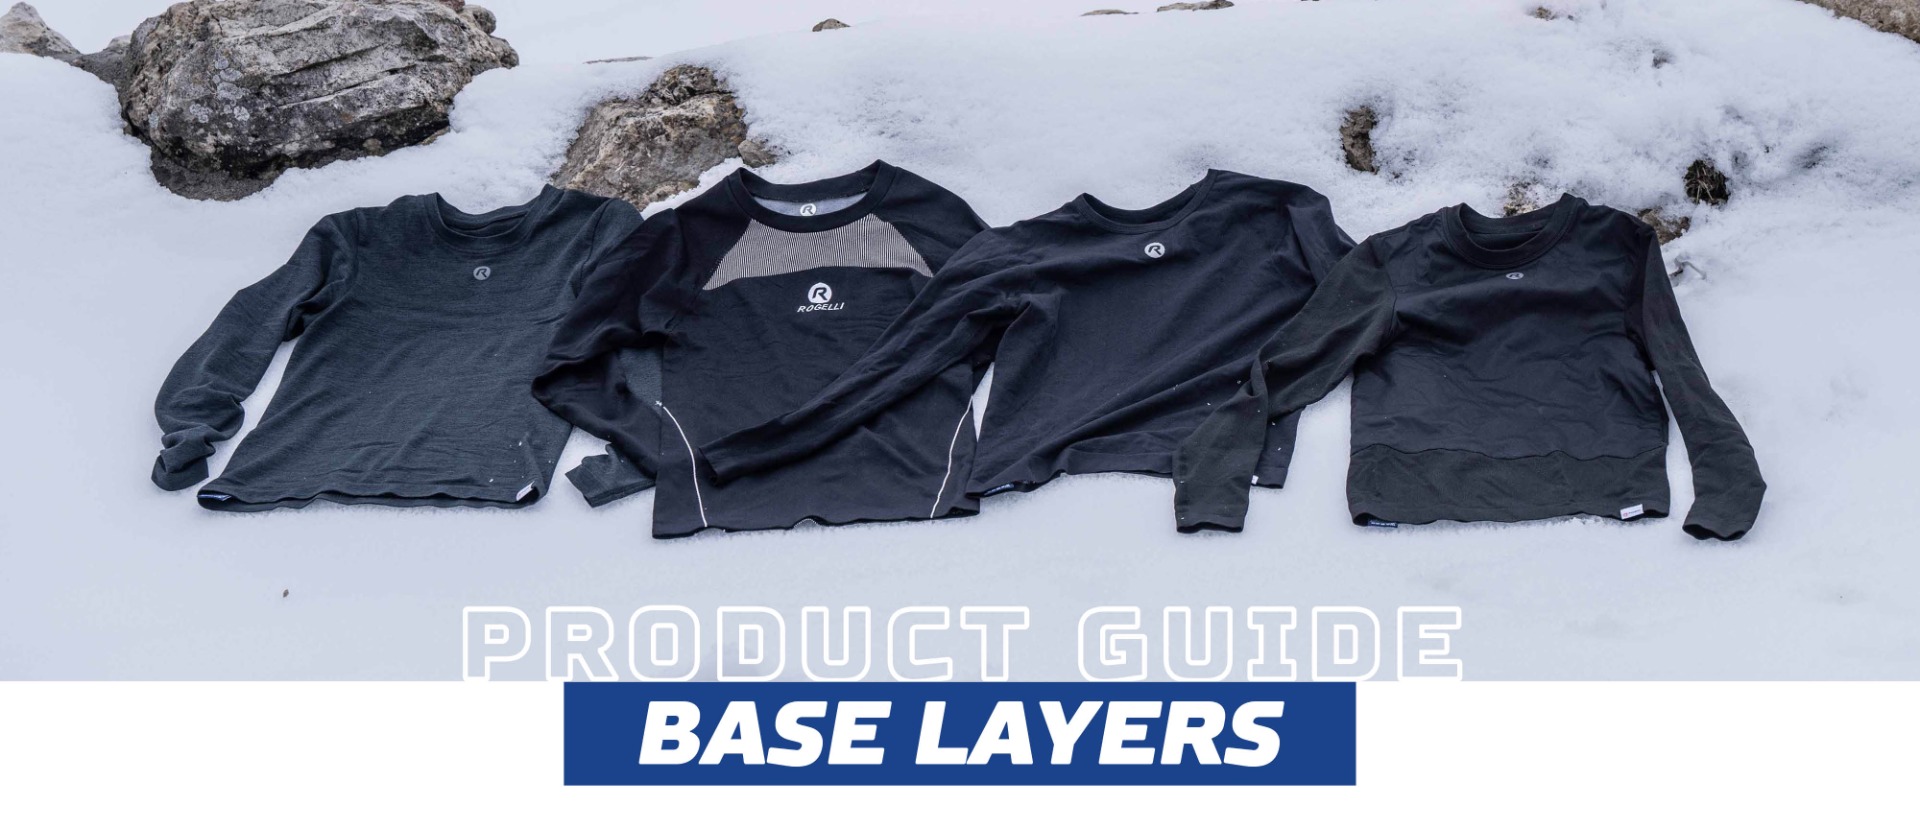 BANNER_PRODUCTGUIDES_BASELAYERS